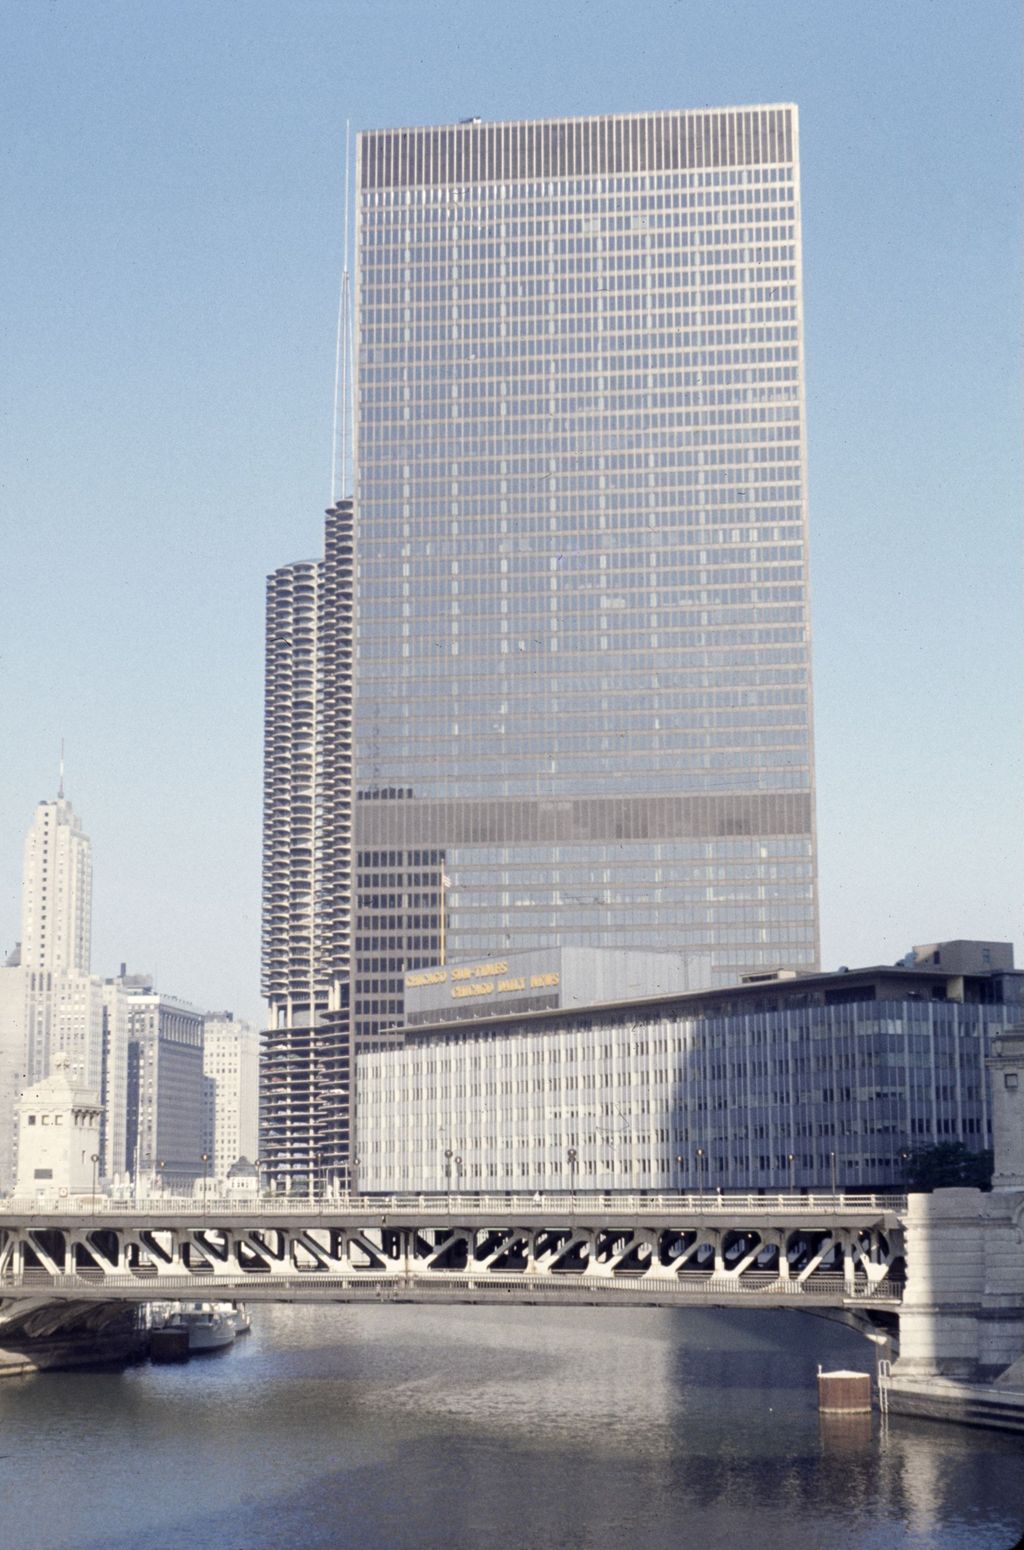 Miniature of IBM Building and Sun-Times Building from the Chicago river